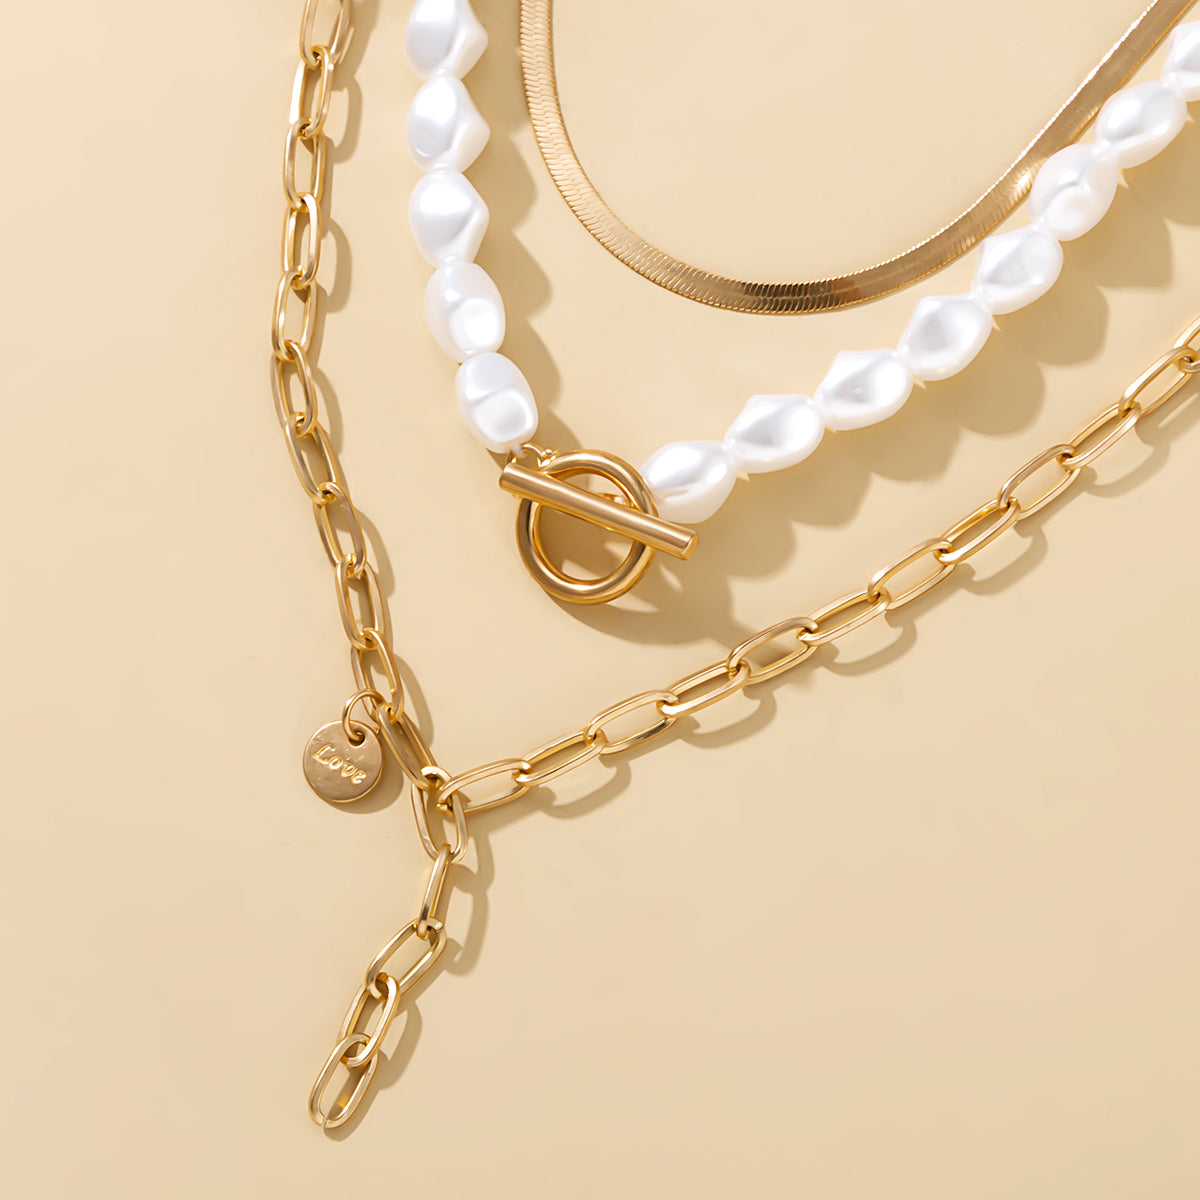 Pearl & 18K Gold-Plated Snake Chain Necklace Set